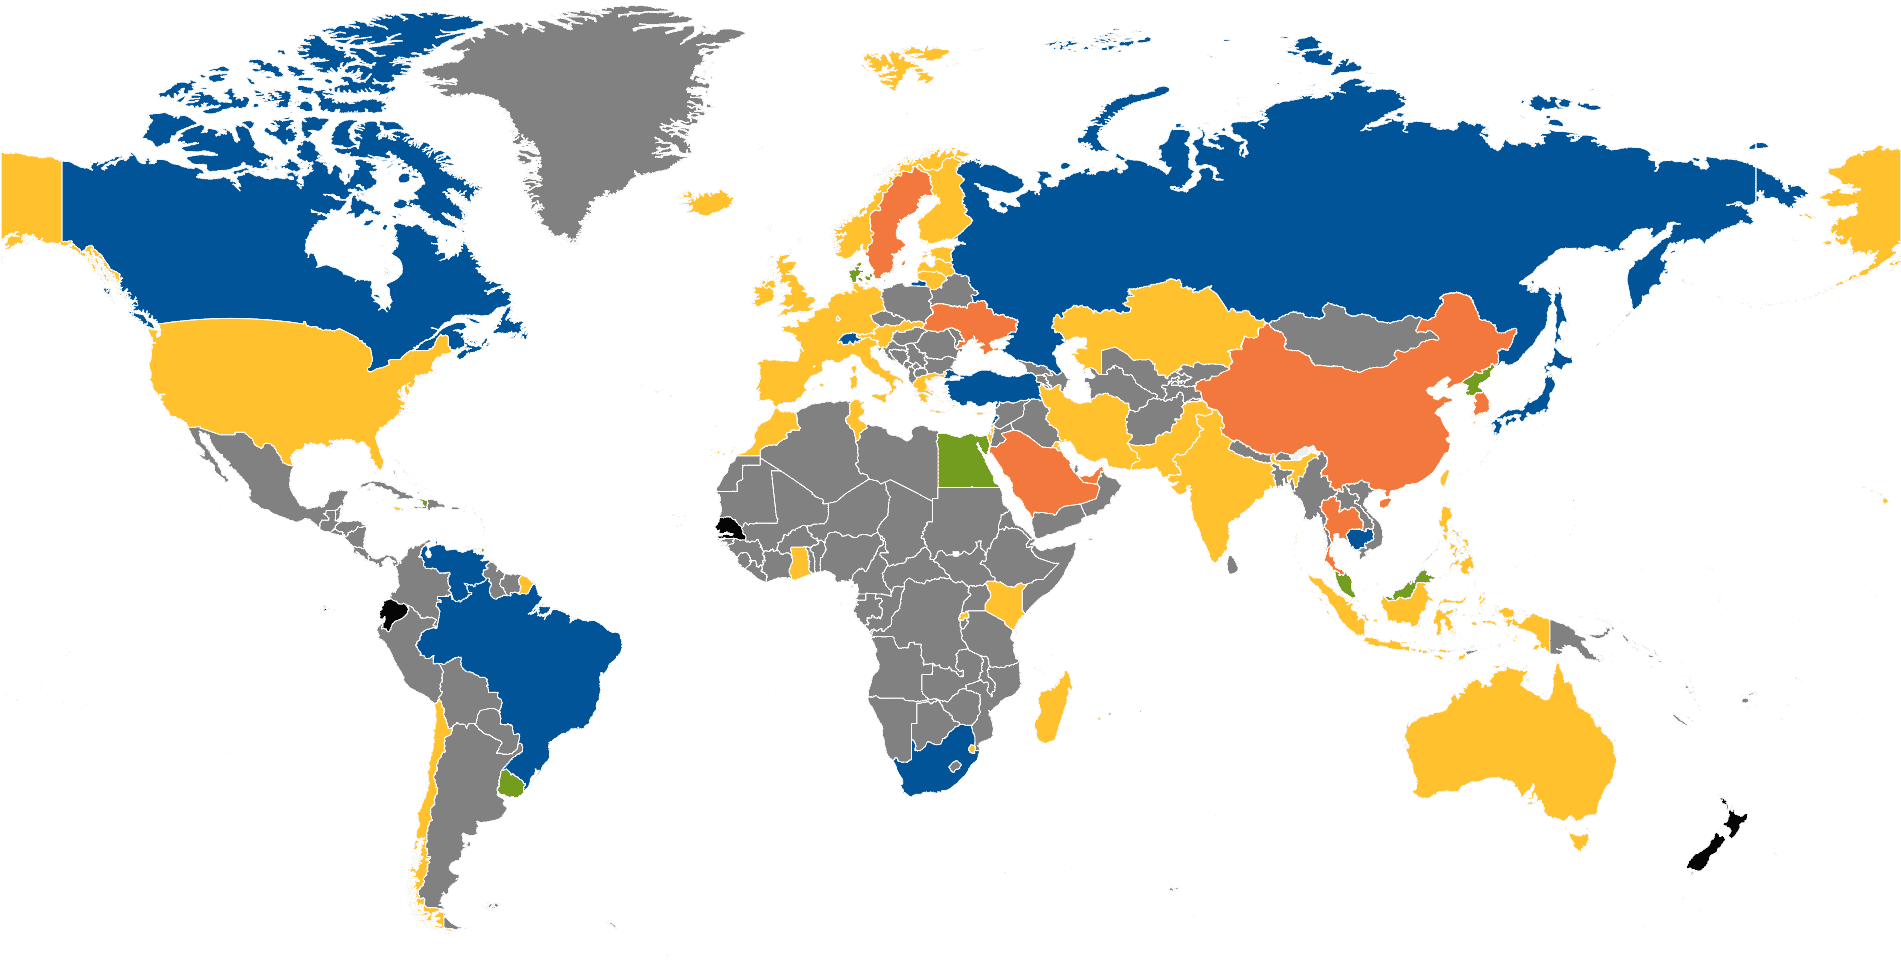 This map shows which countries are currently developing or researching central bank digital currency (CBDC).